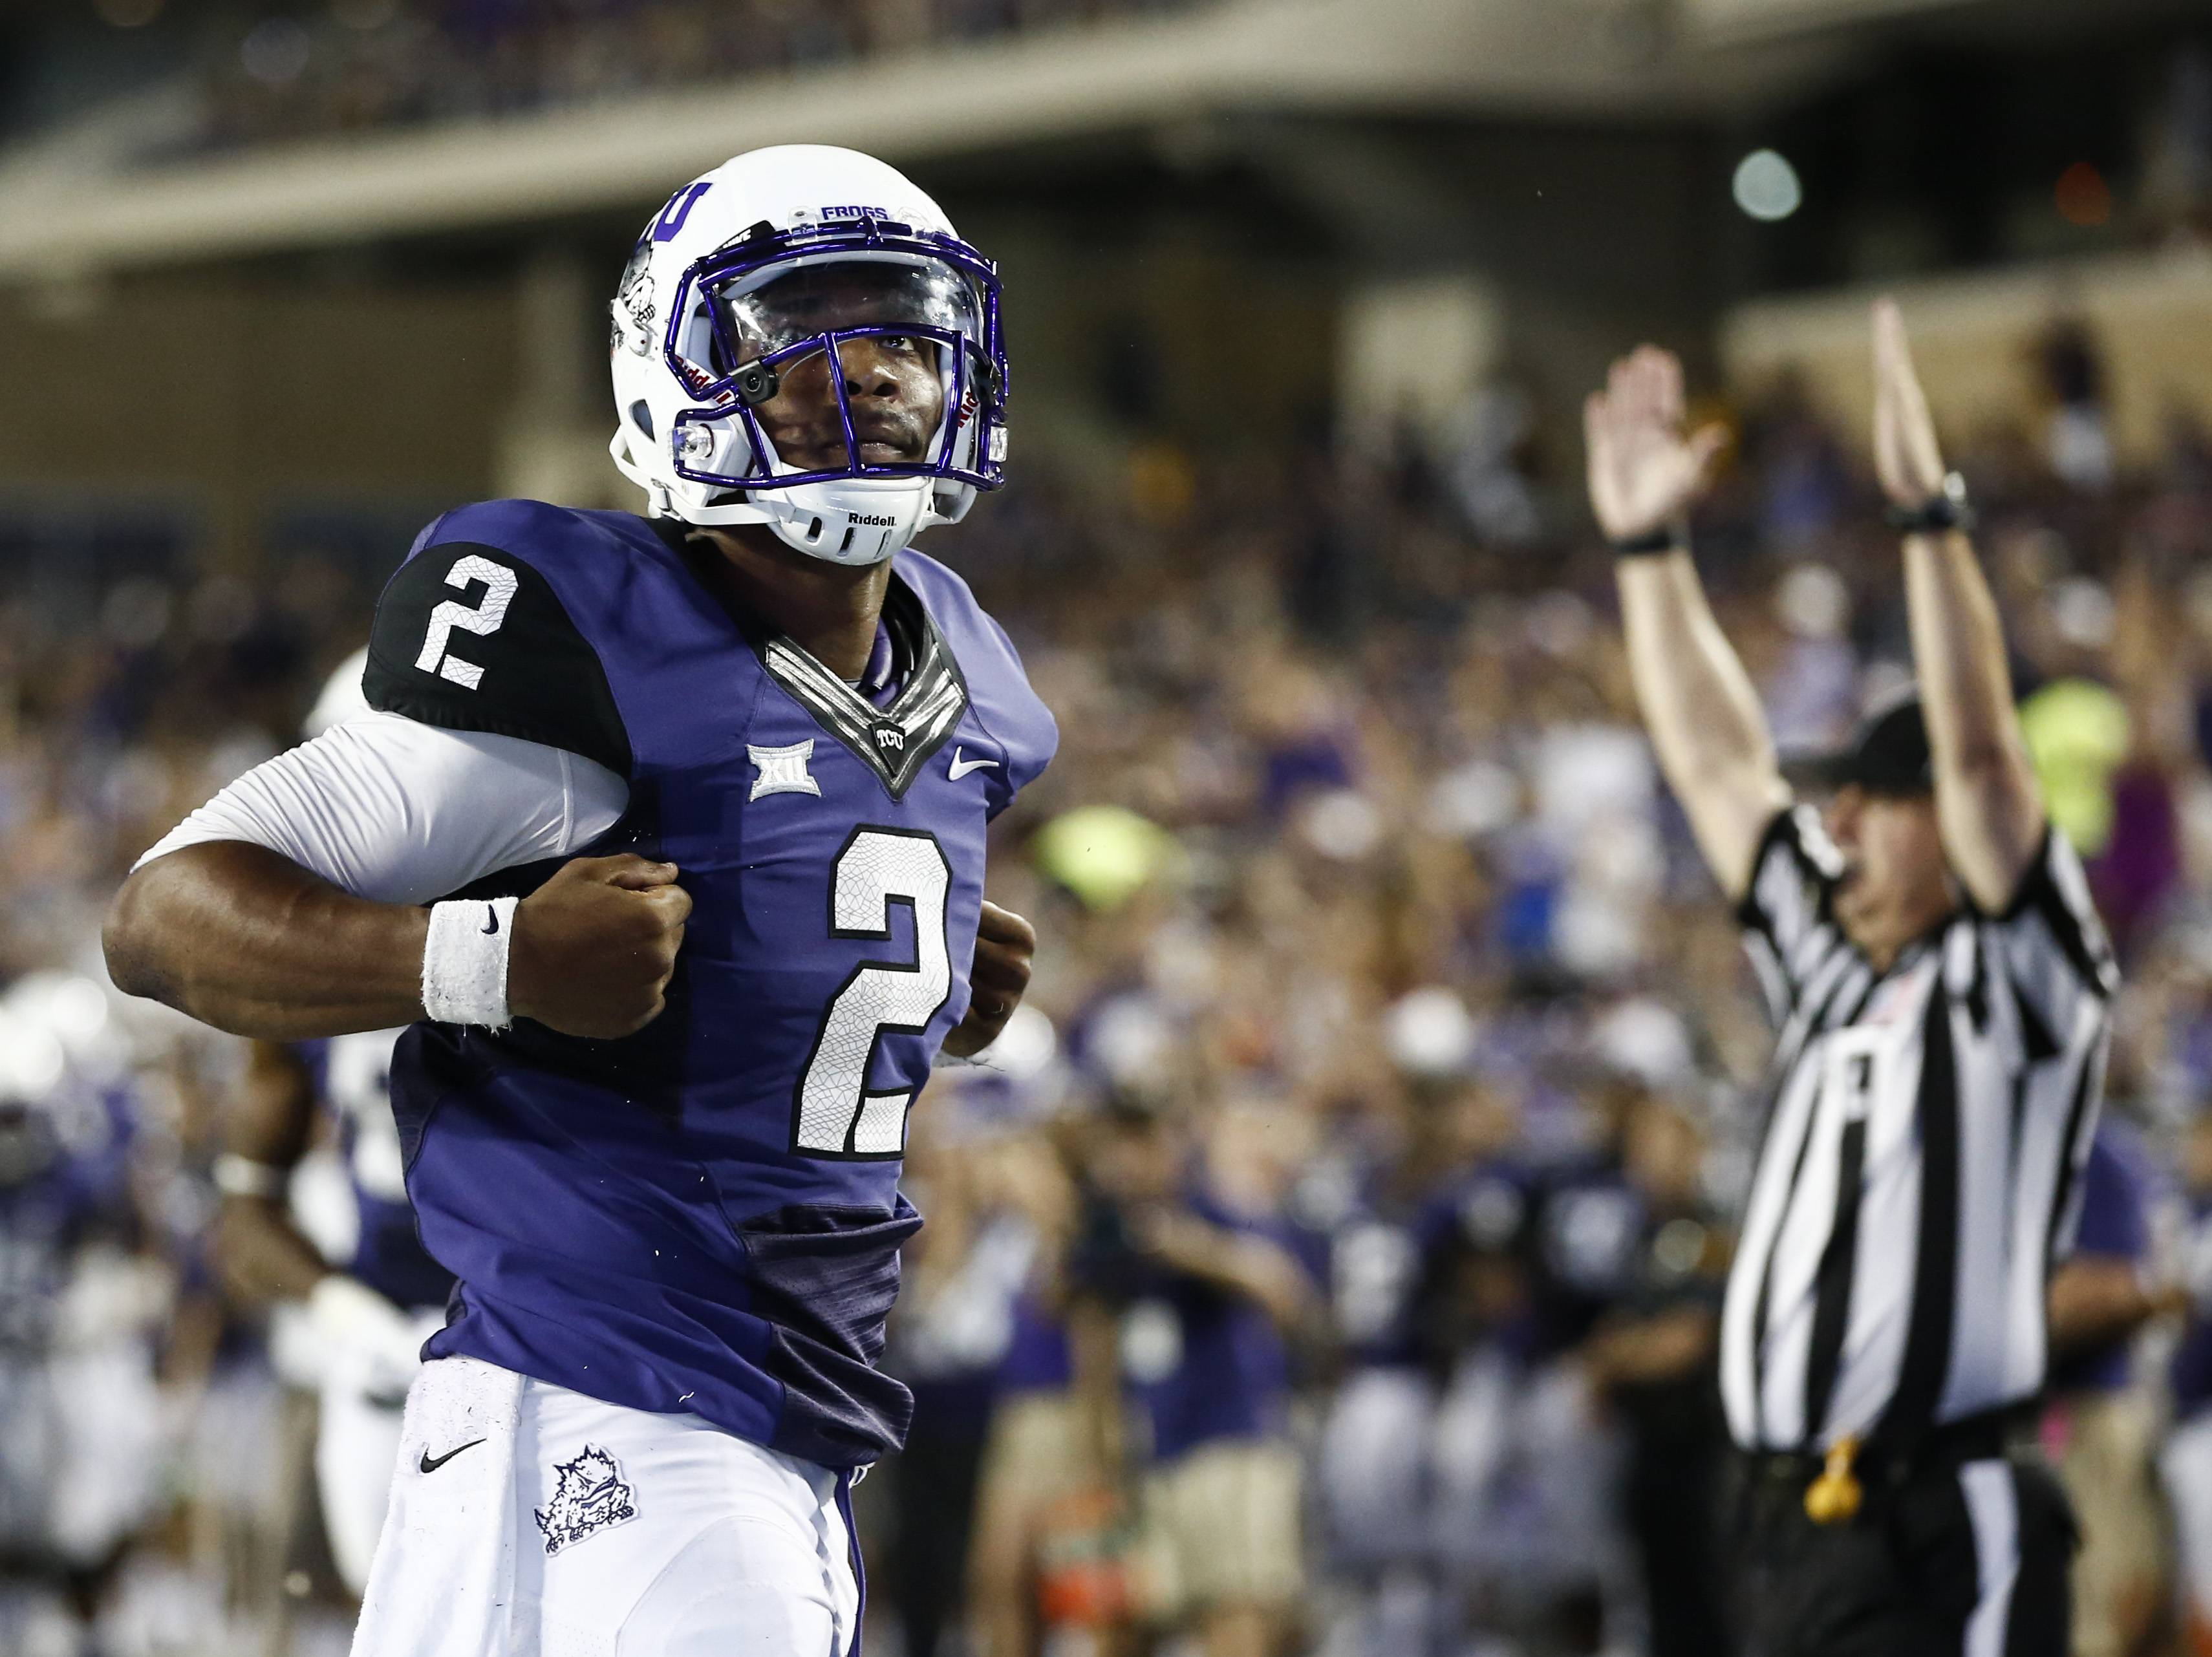 Trevone Boykin Answers Tcu S Biggest Question In Dominant Performance